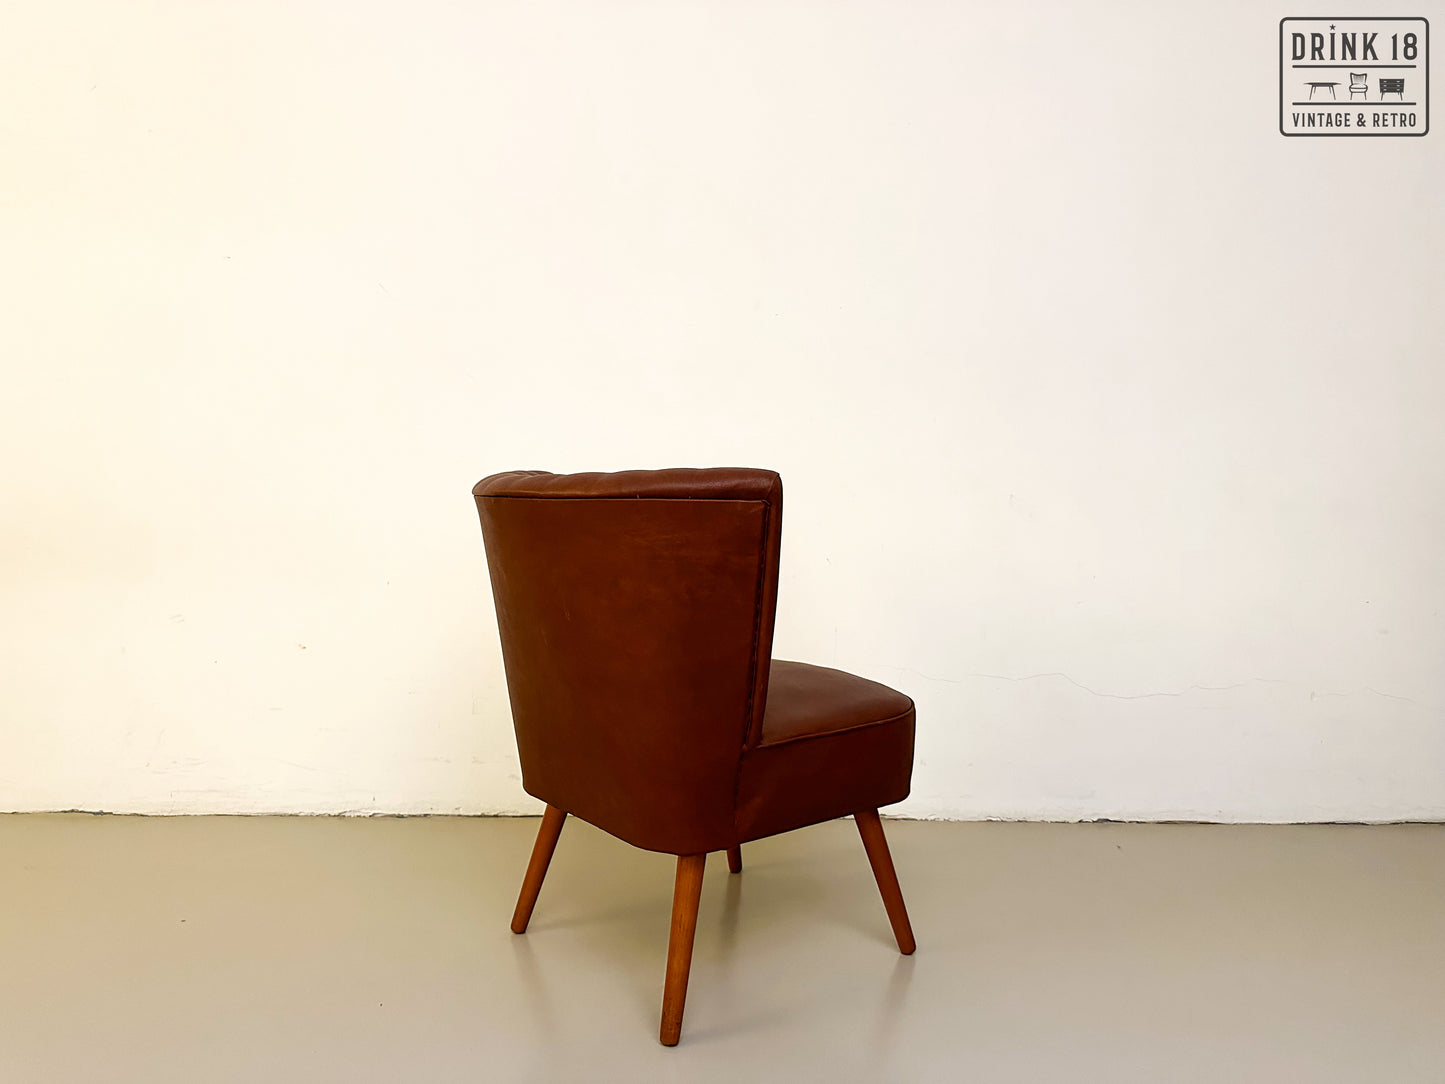 Vintage - Expo 58 / Cocktail chair